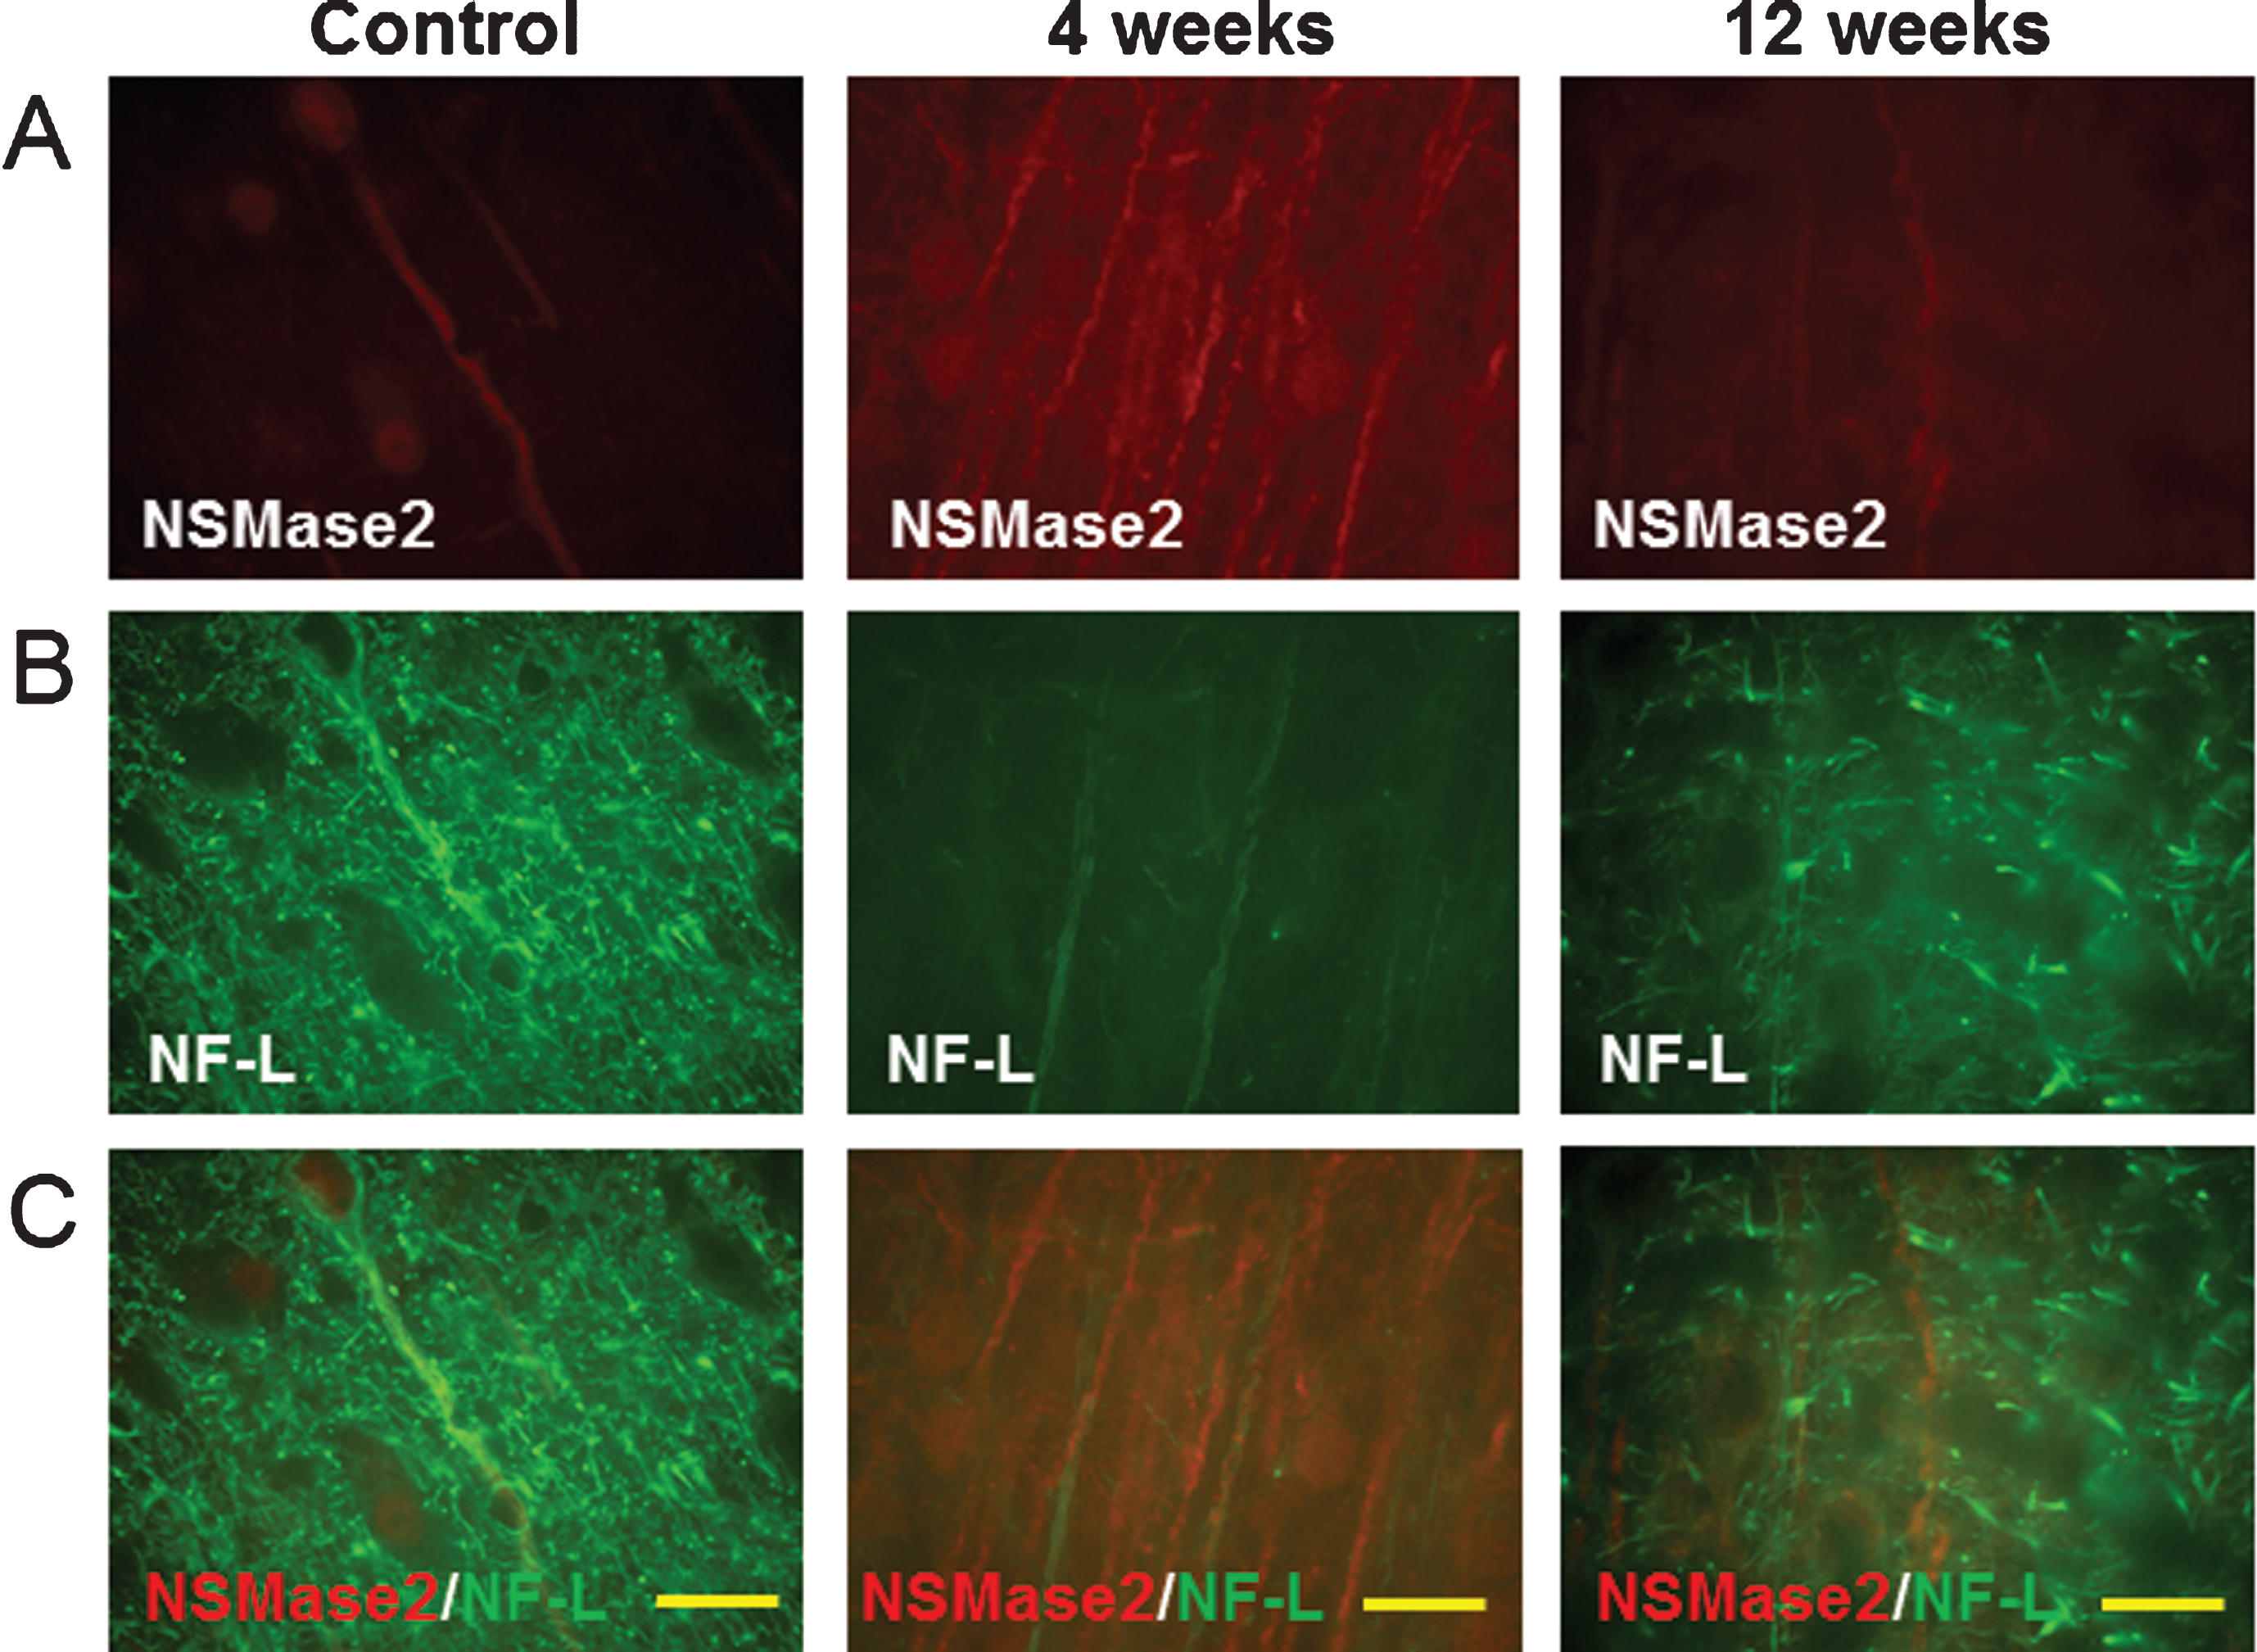 Localization of N-SMase2 in cortex of control rat and in rats 4 weeks and 12 weeks following LPS/IS/H. In control, N-SMase2 was localized to occasional cell bodies and to occasional axons, with N-SMase2 and neurofilament light chain protein (NF-L) co-localizing in these axons (N-SMase2/NF-L). At 4 weeks post LPS/IS/H, N-SMase2 was localized to large numbers of abnormal linear structures and some of these structures co-localized with NF-L (N-SMase2/NF-L). By 12 weeks post LPS/IS/H, N-SMase2 was again observed in a few scattered axons in cortex that co-localized with NF-L and appeared similar to controls. Bars = 50 μm.